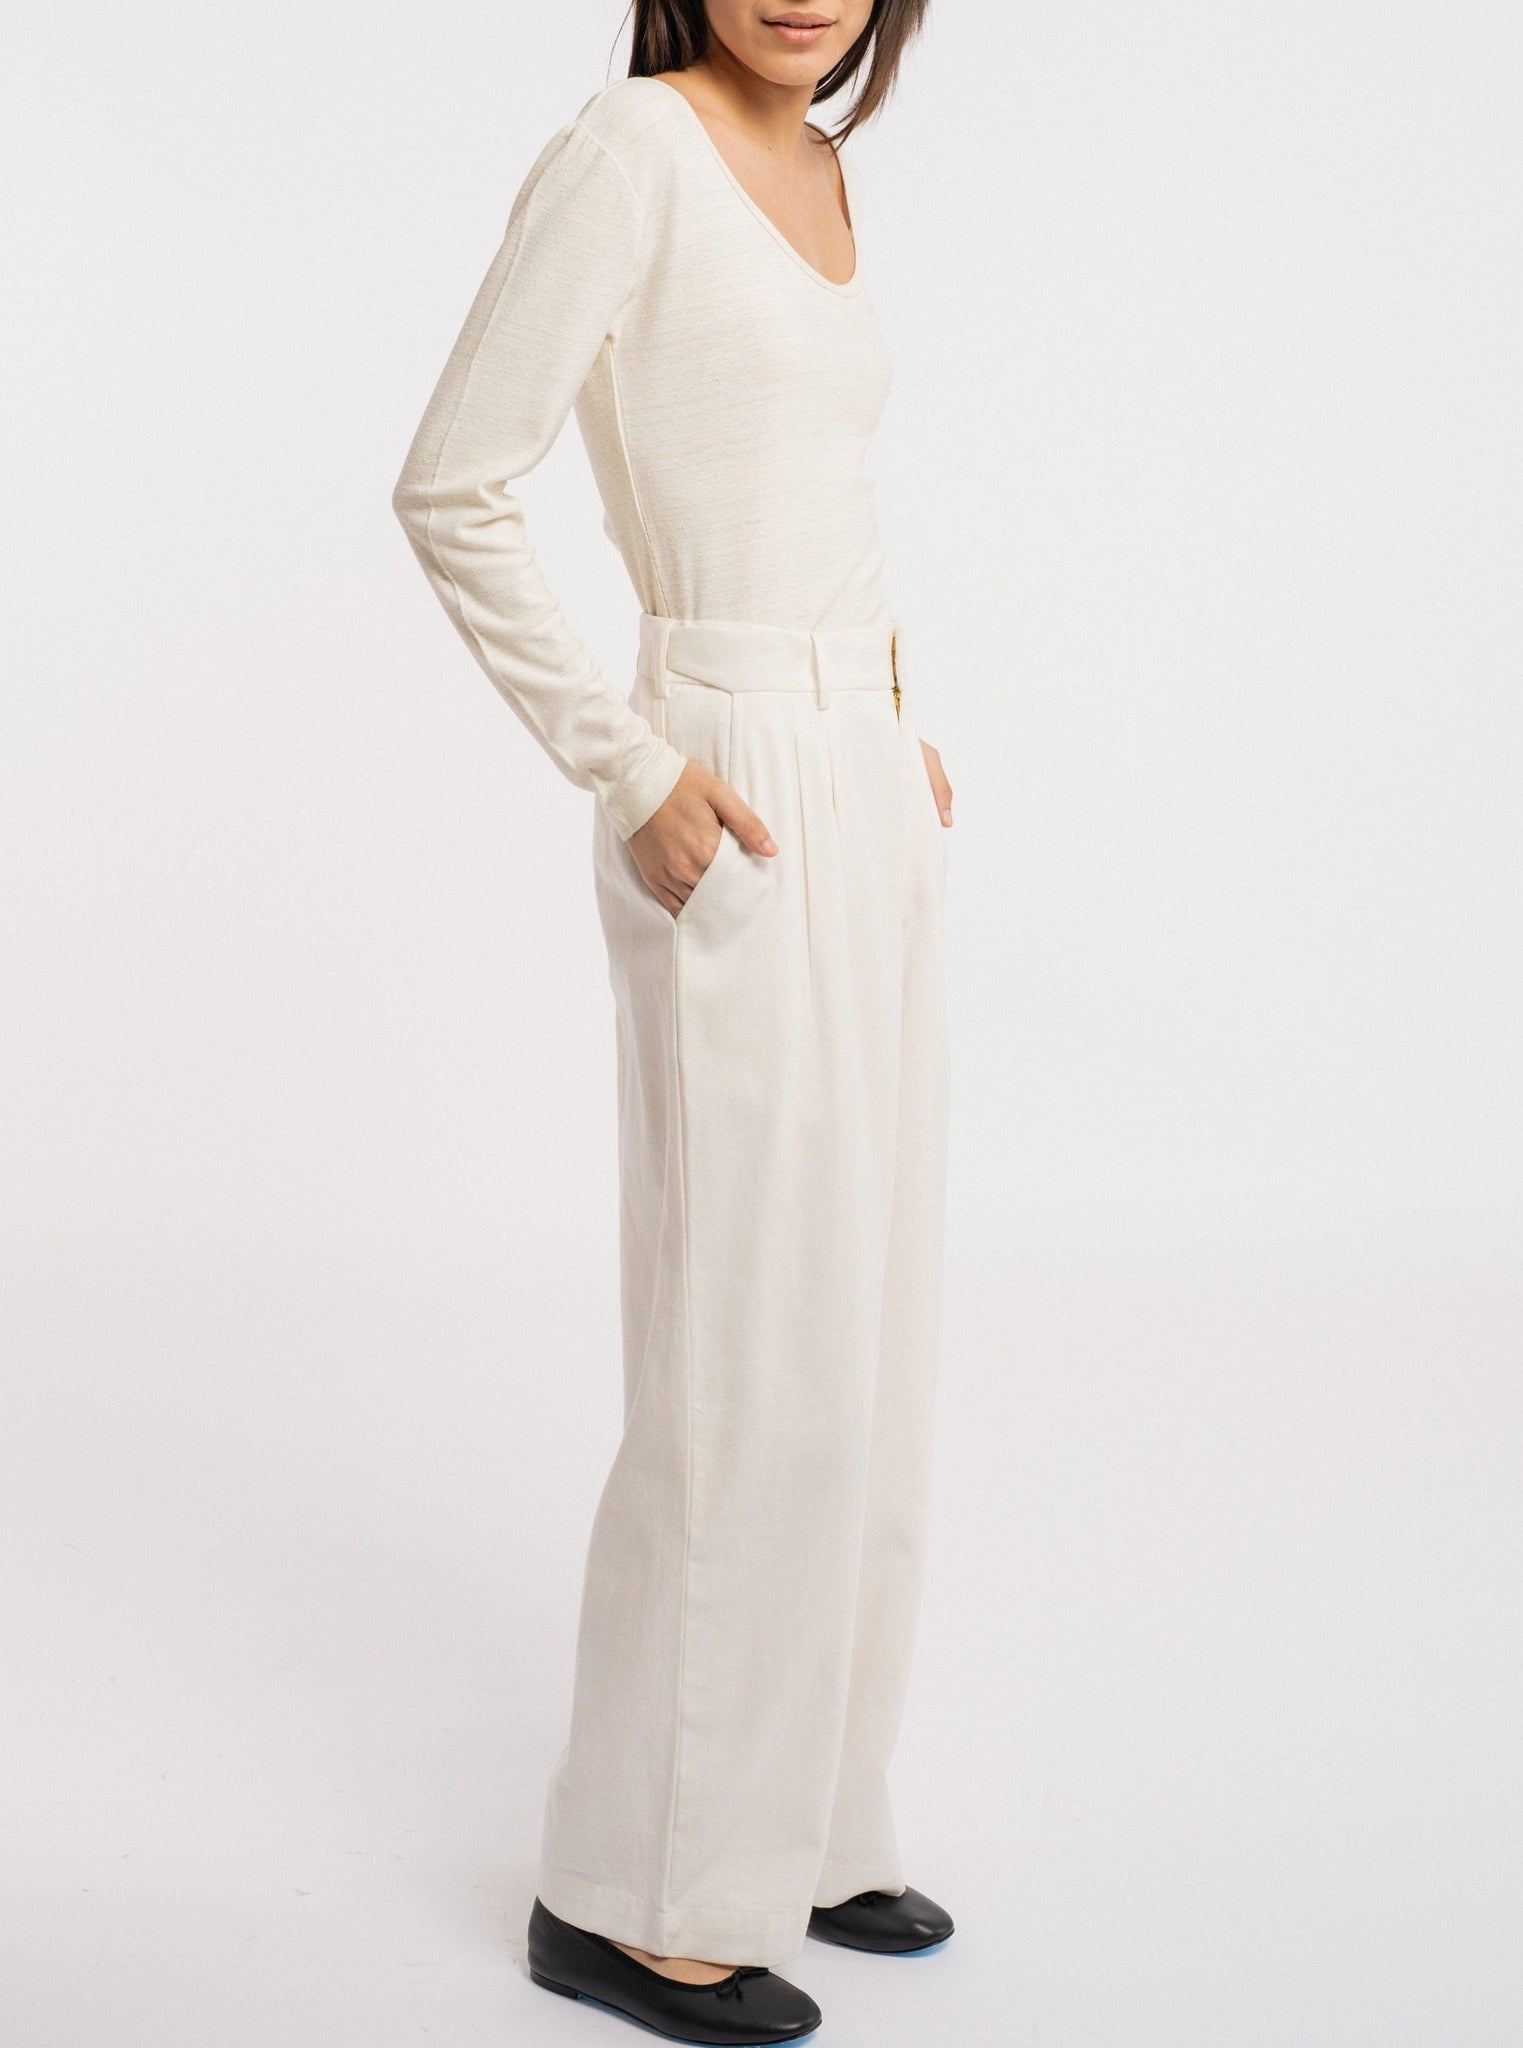 The model is wearing a white long-sleeved Scoop Neck Tee - Ivory made from silk noil, showcasing sustainability in its wide leg pants.